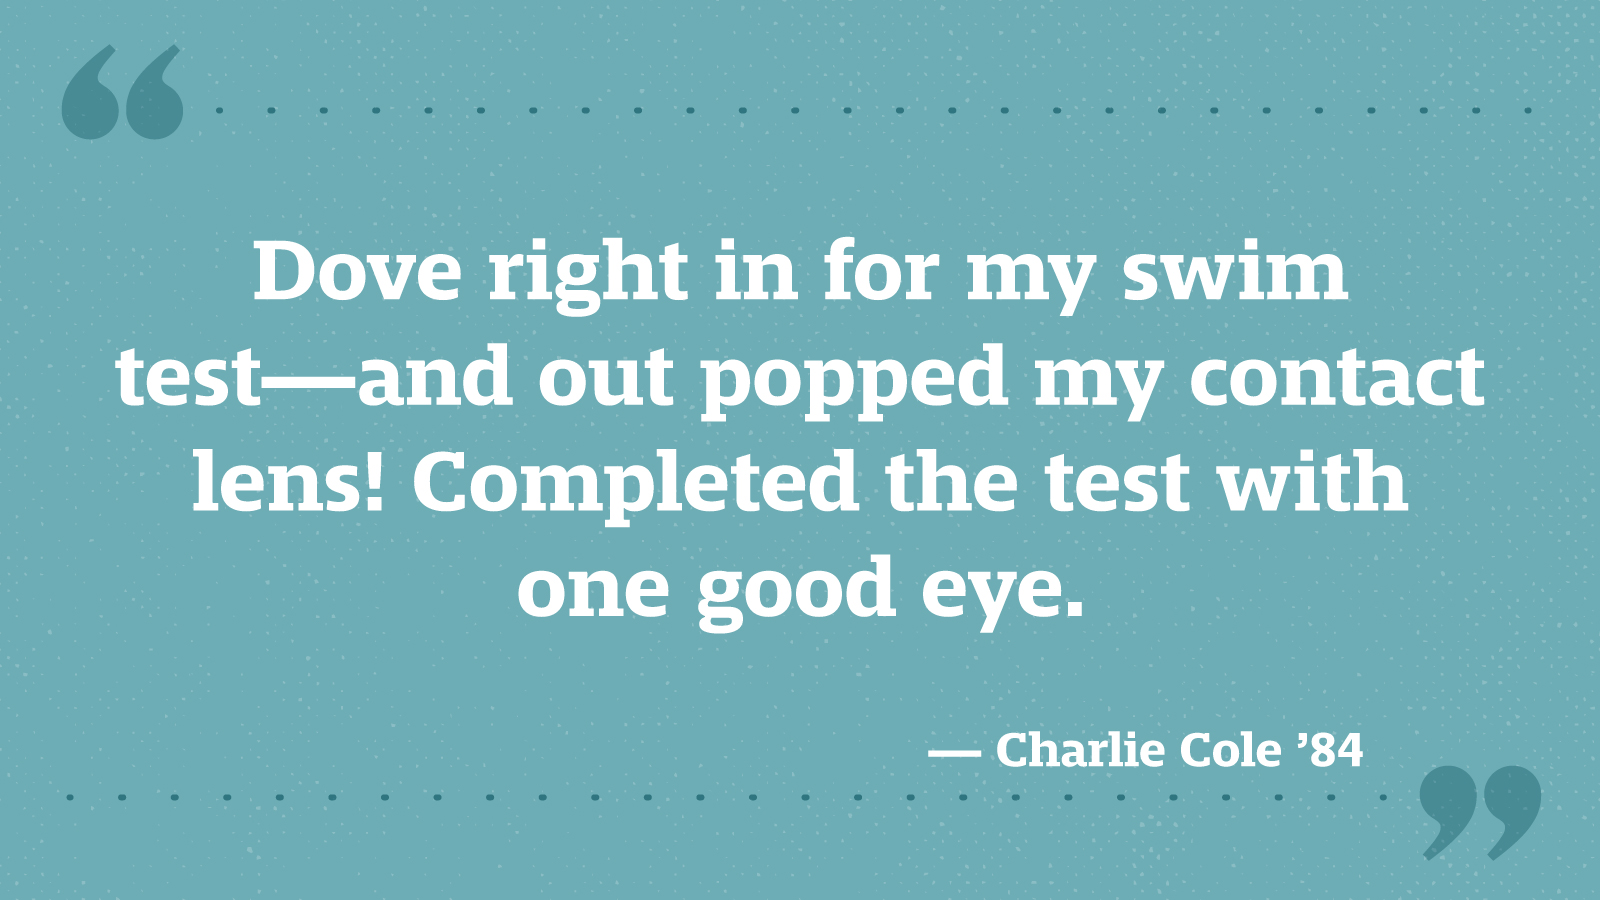 Dove right in for my swim test—and out popped my contact lens! Completed the test with one good eye. — Charlie Cole ’84